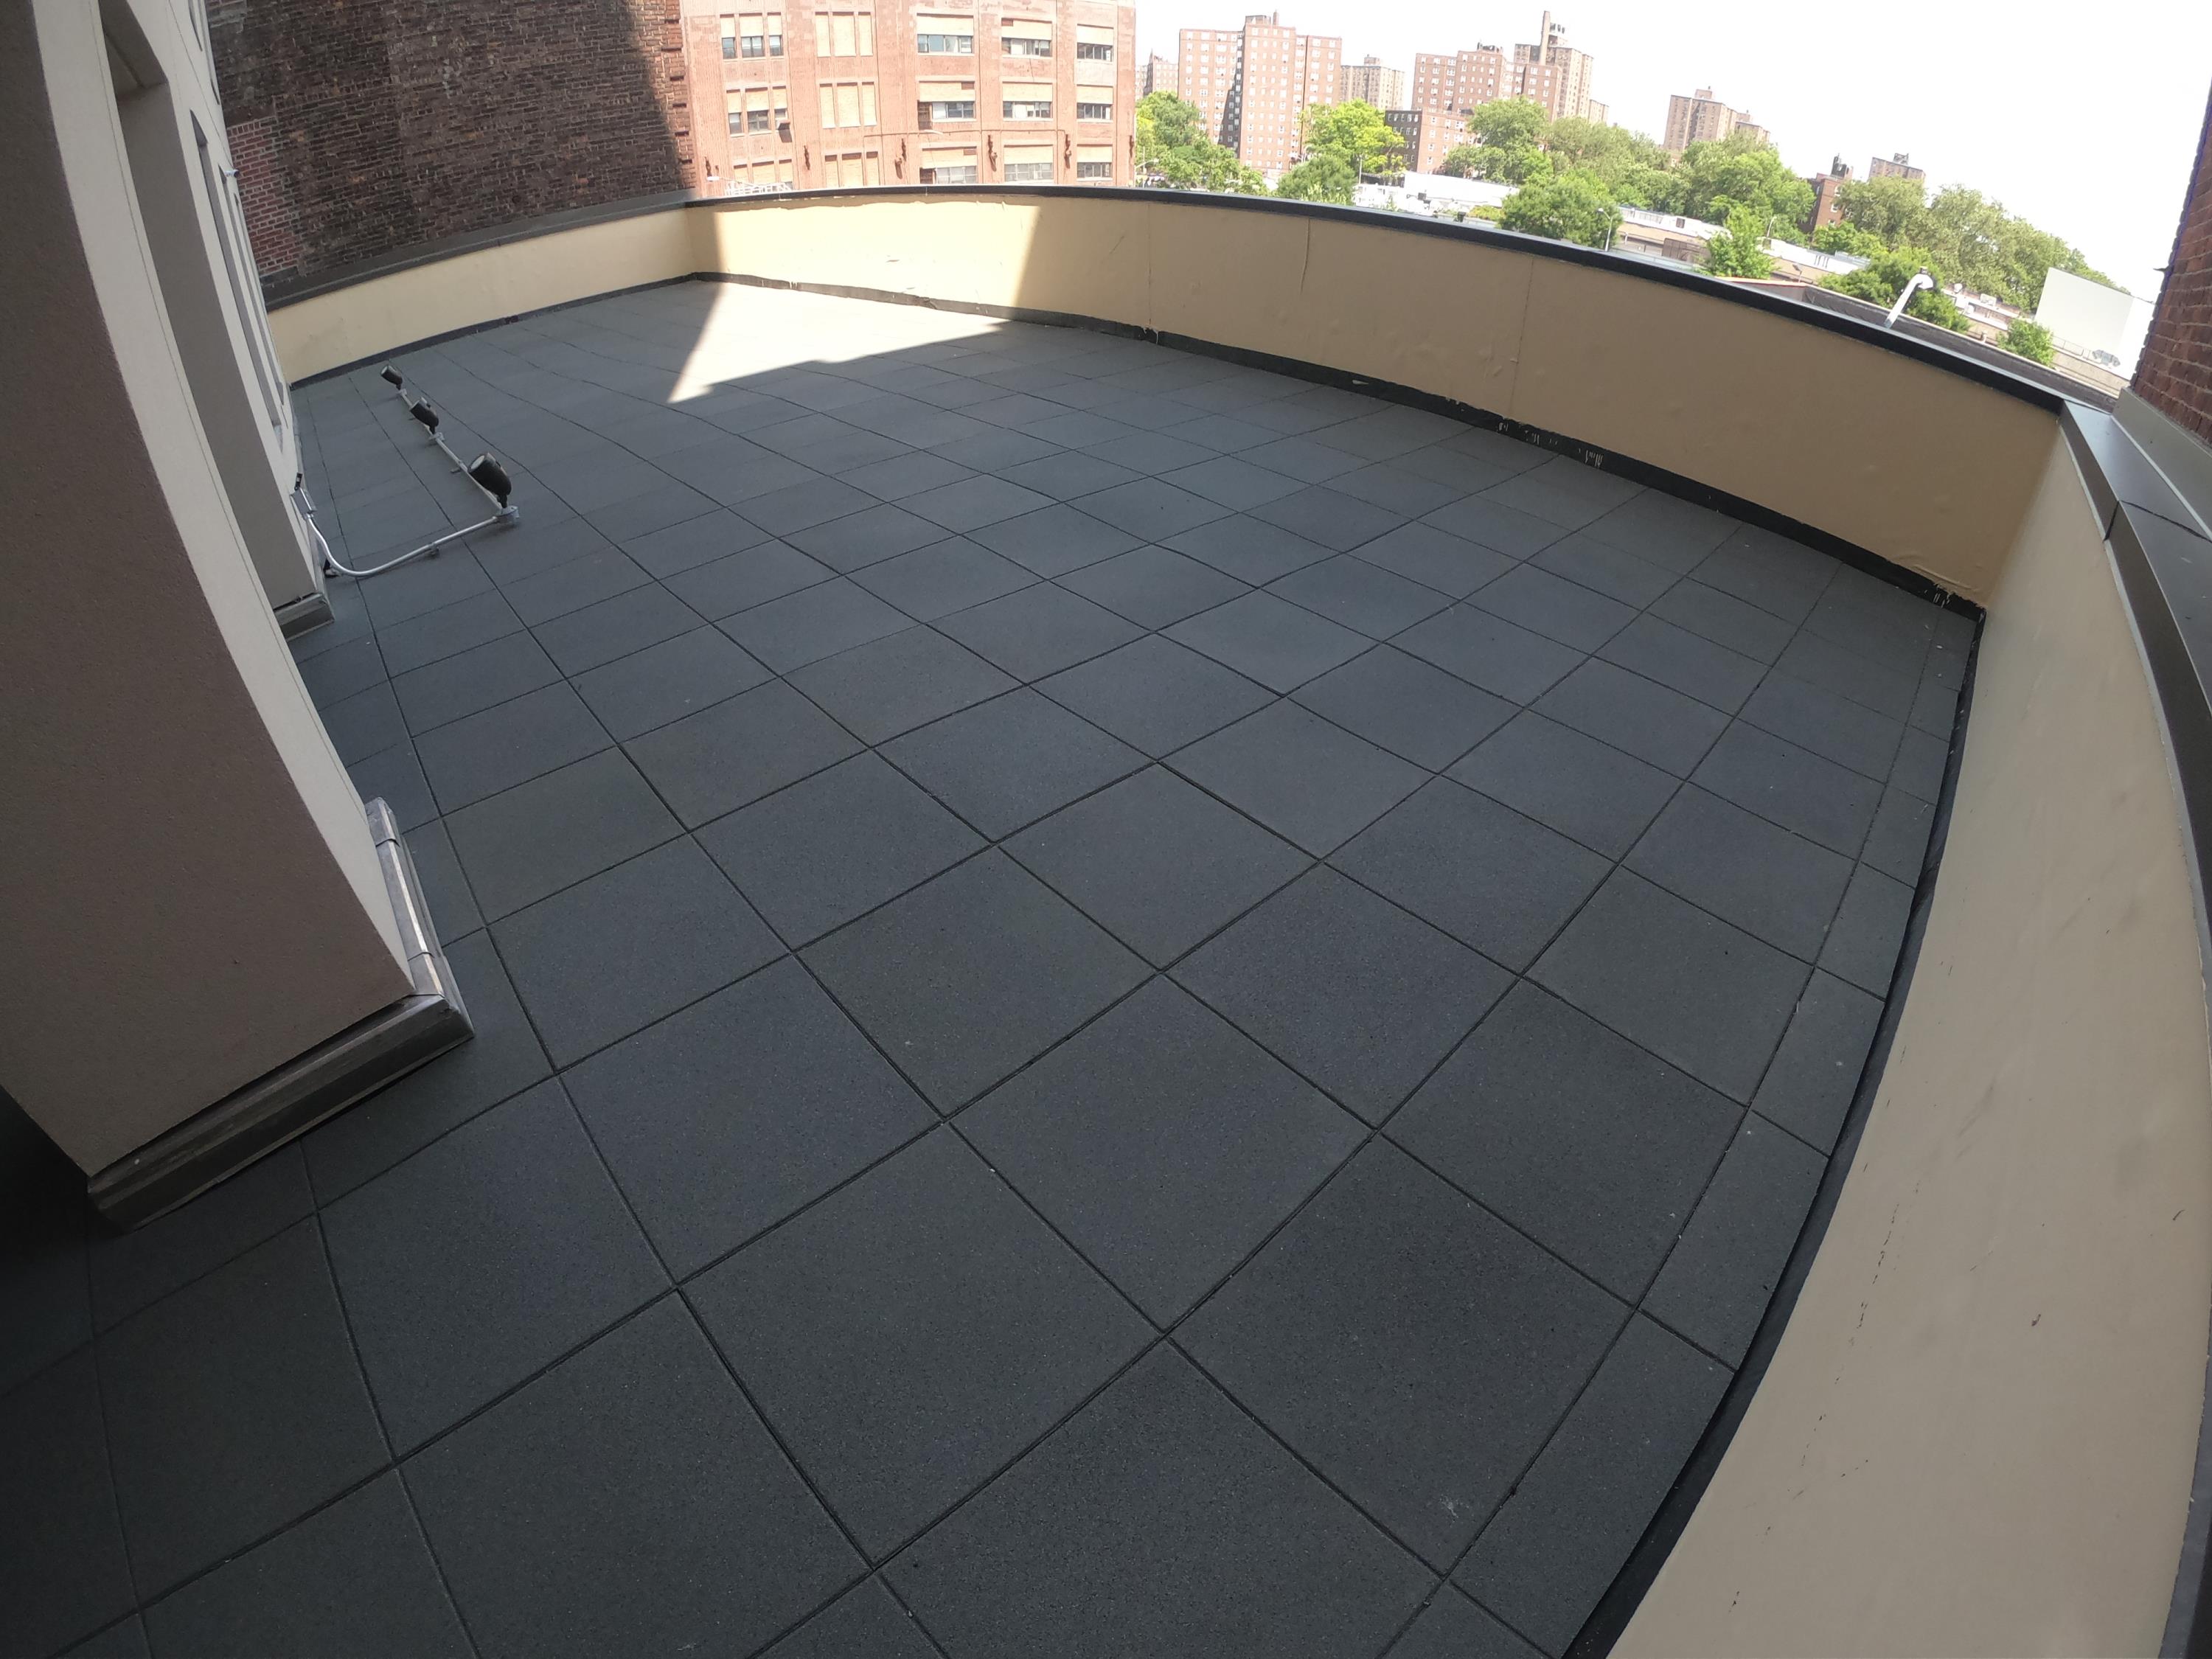 UNITY - Soft rubber pavers installed on this hotel rooftop